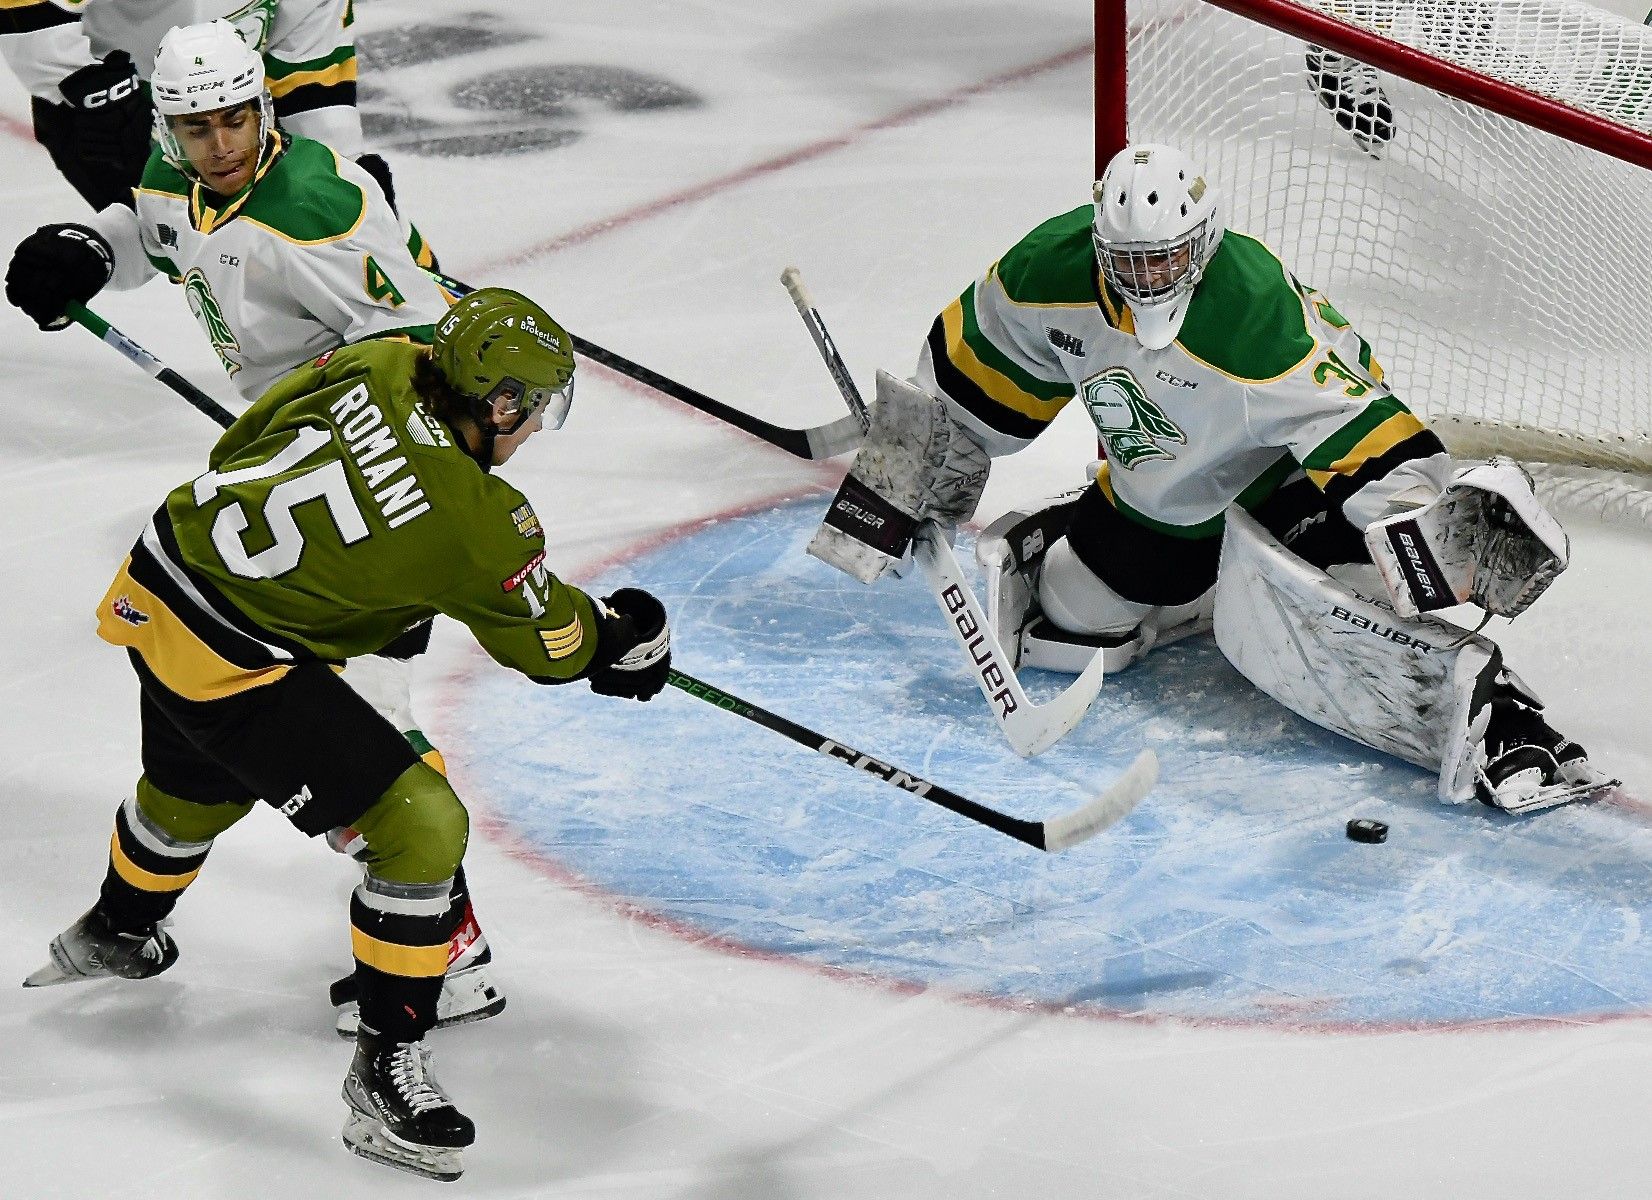 North Bay news: Battalion moving onto eastern conference finals